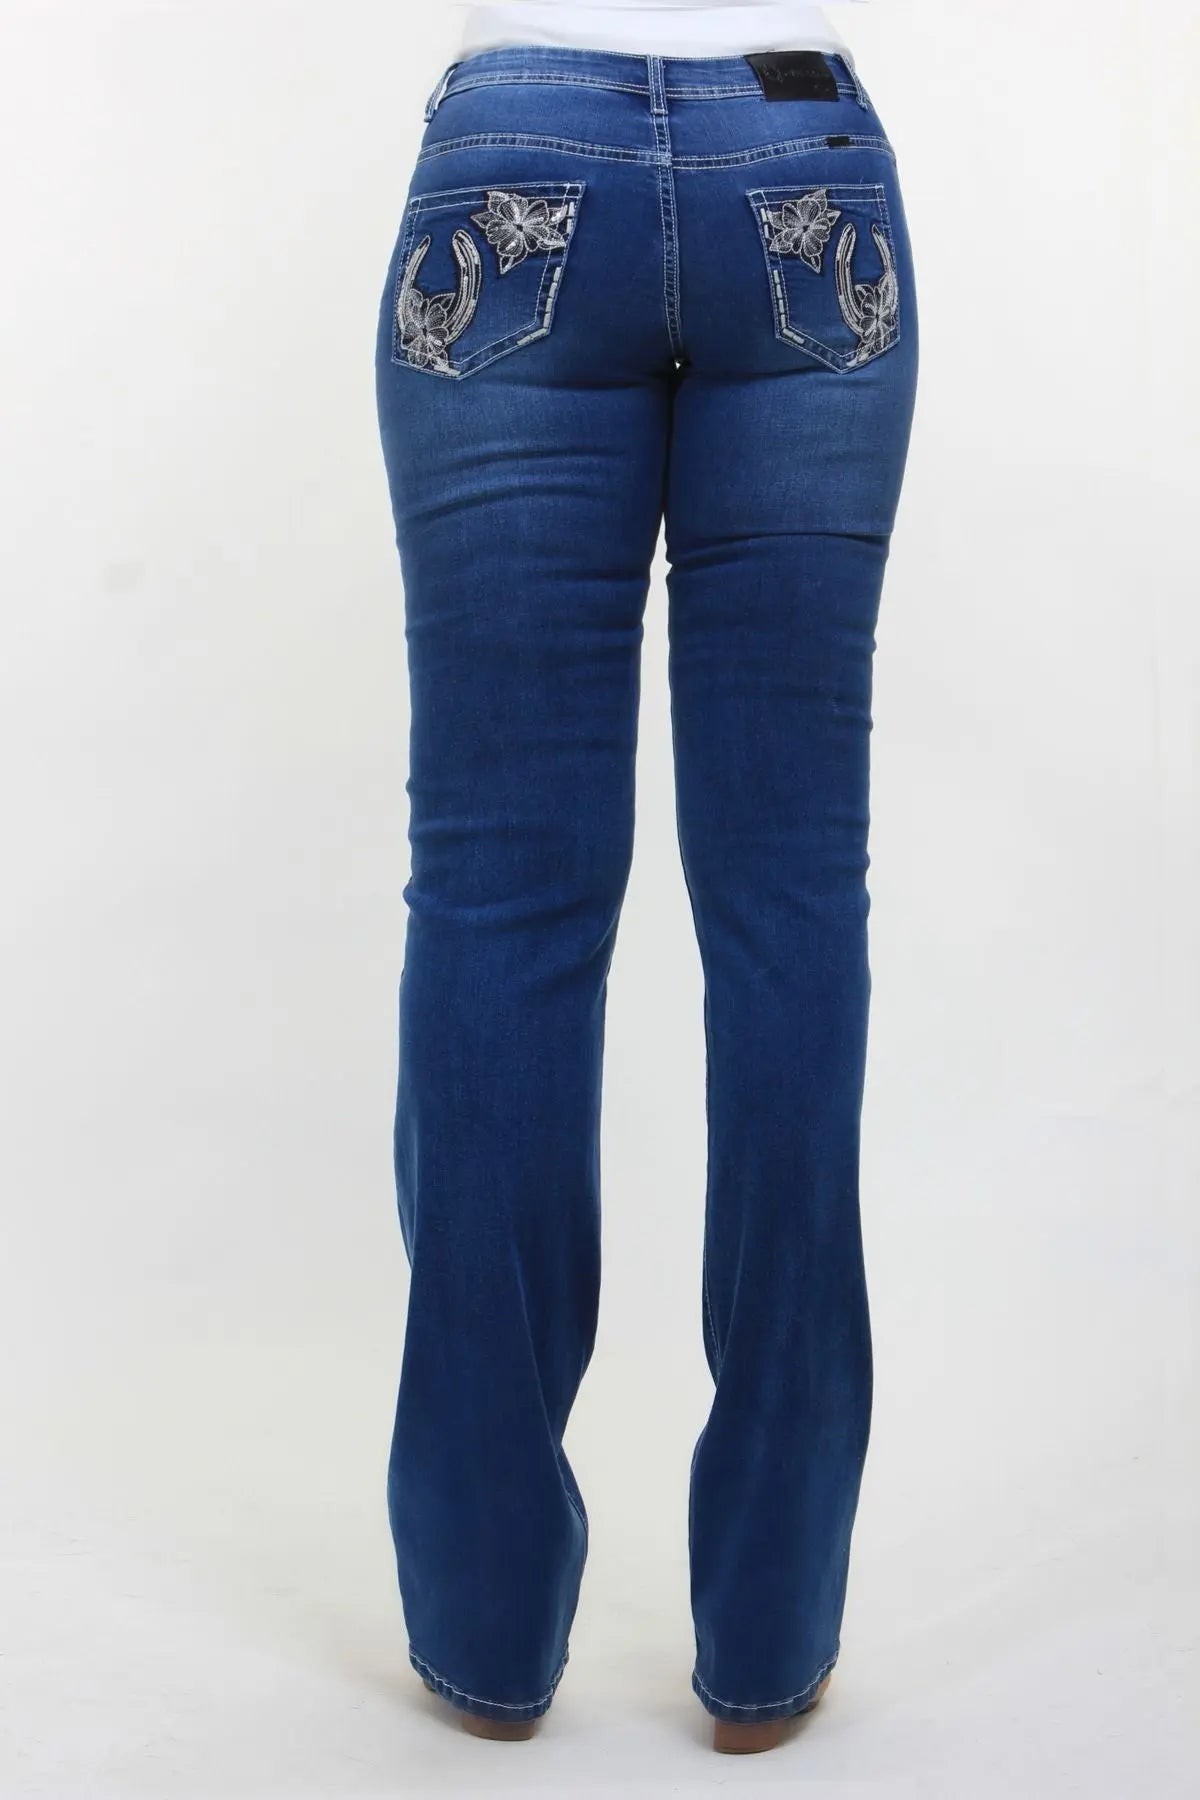 Shelby embellished Outback Jeans Supply Co